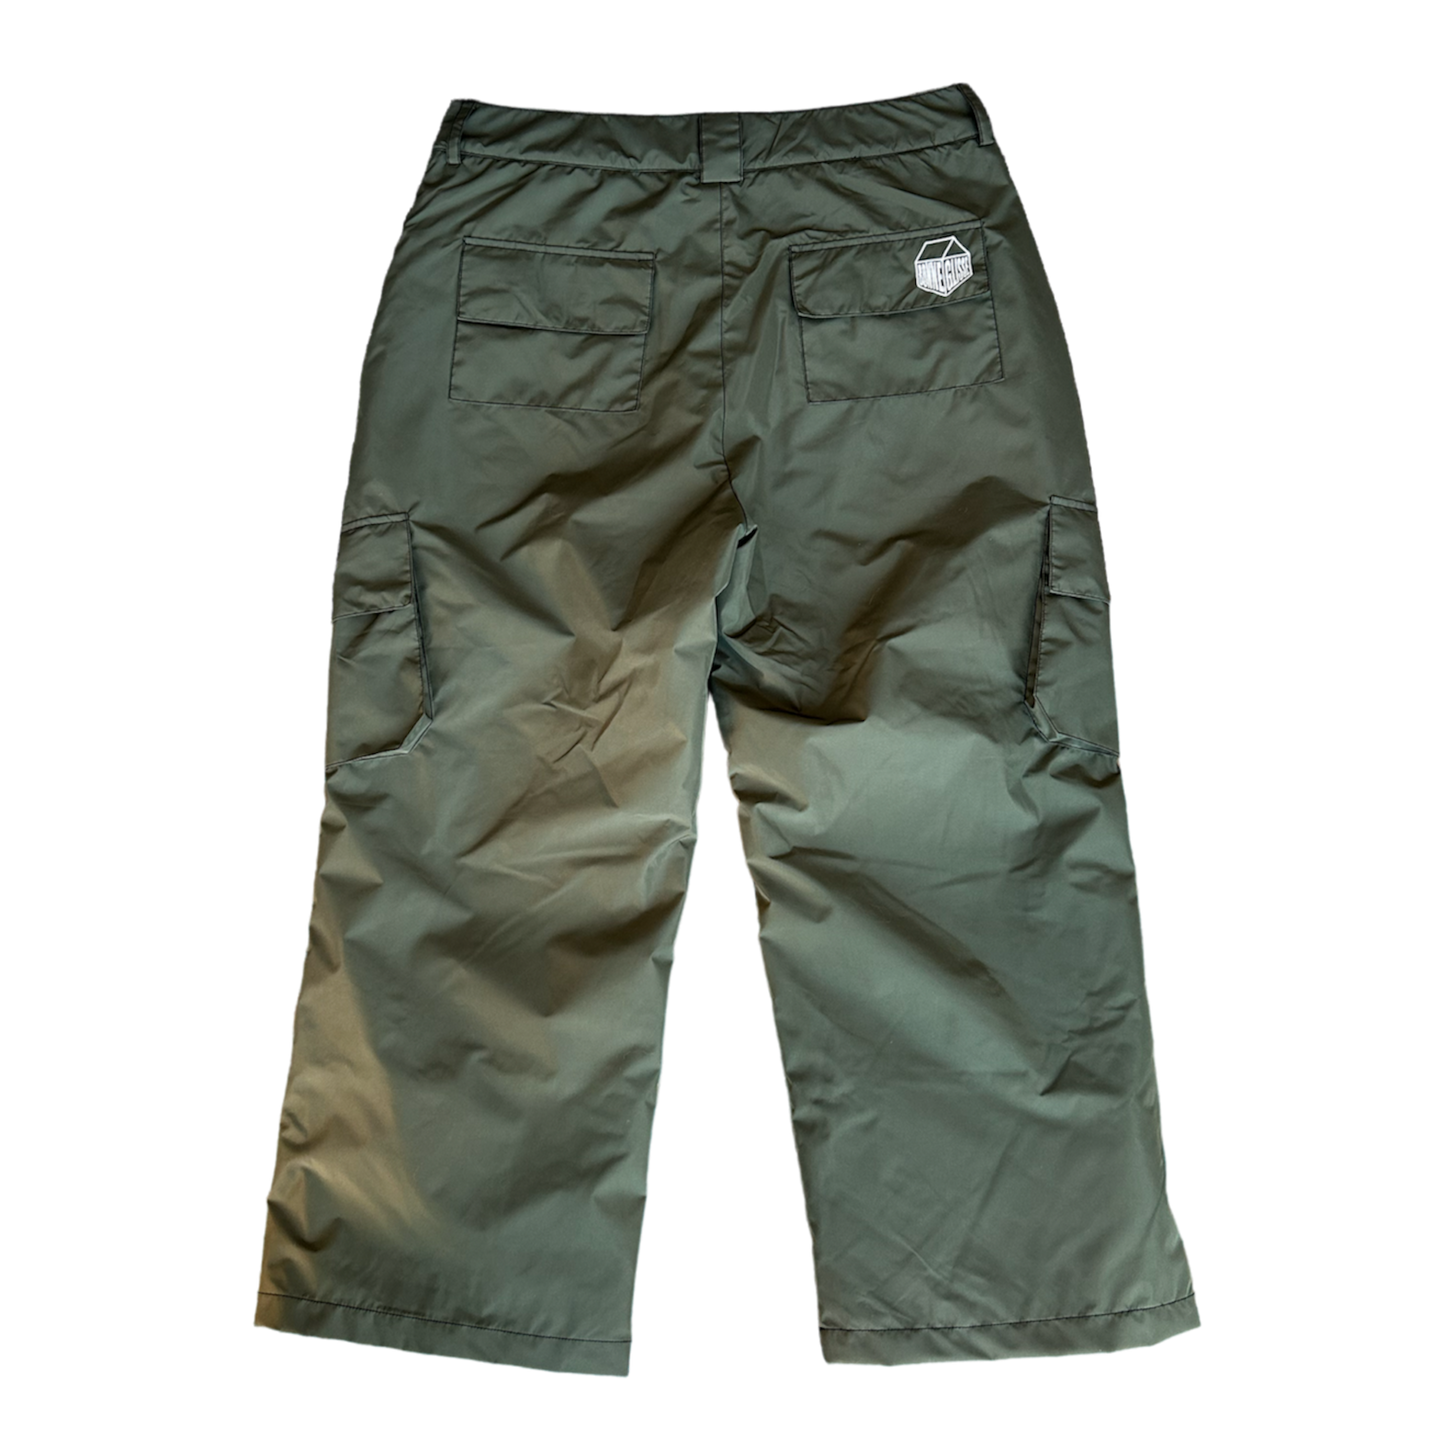 Contrast Cargos - Forest Green